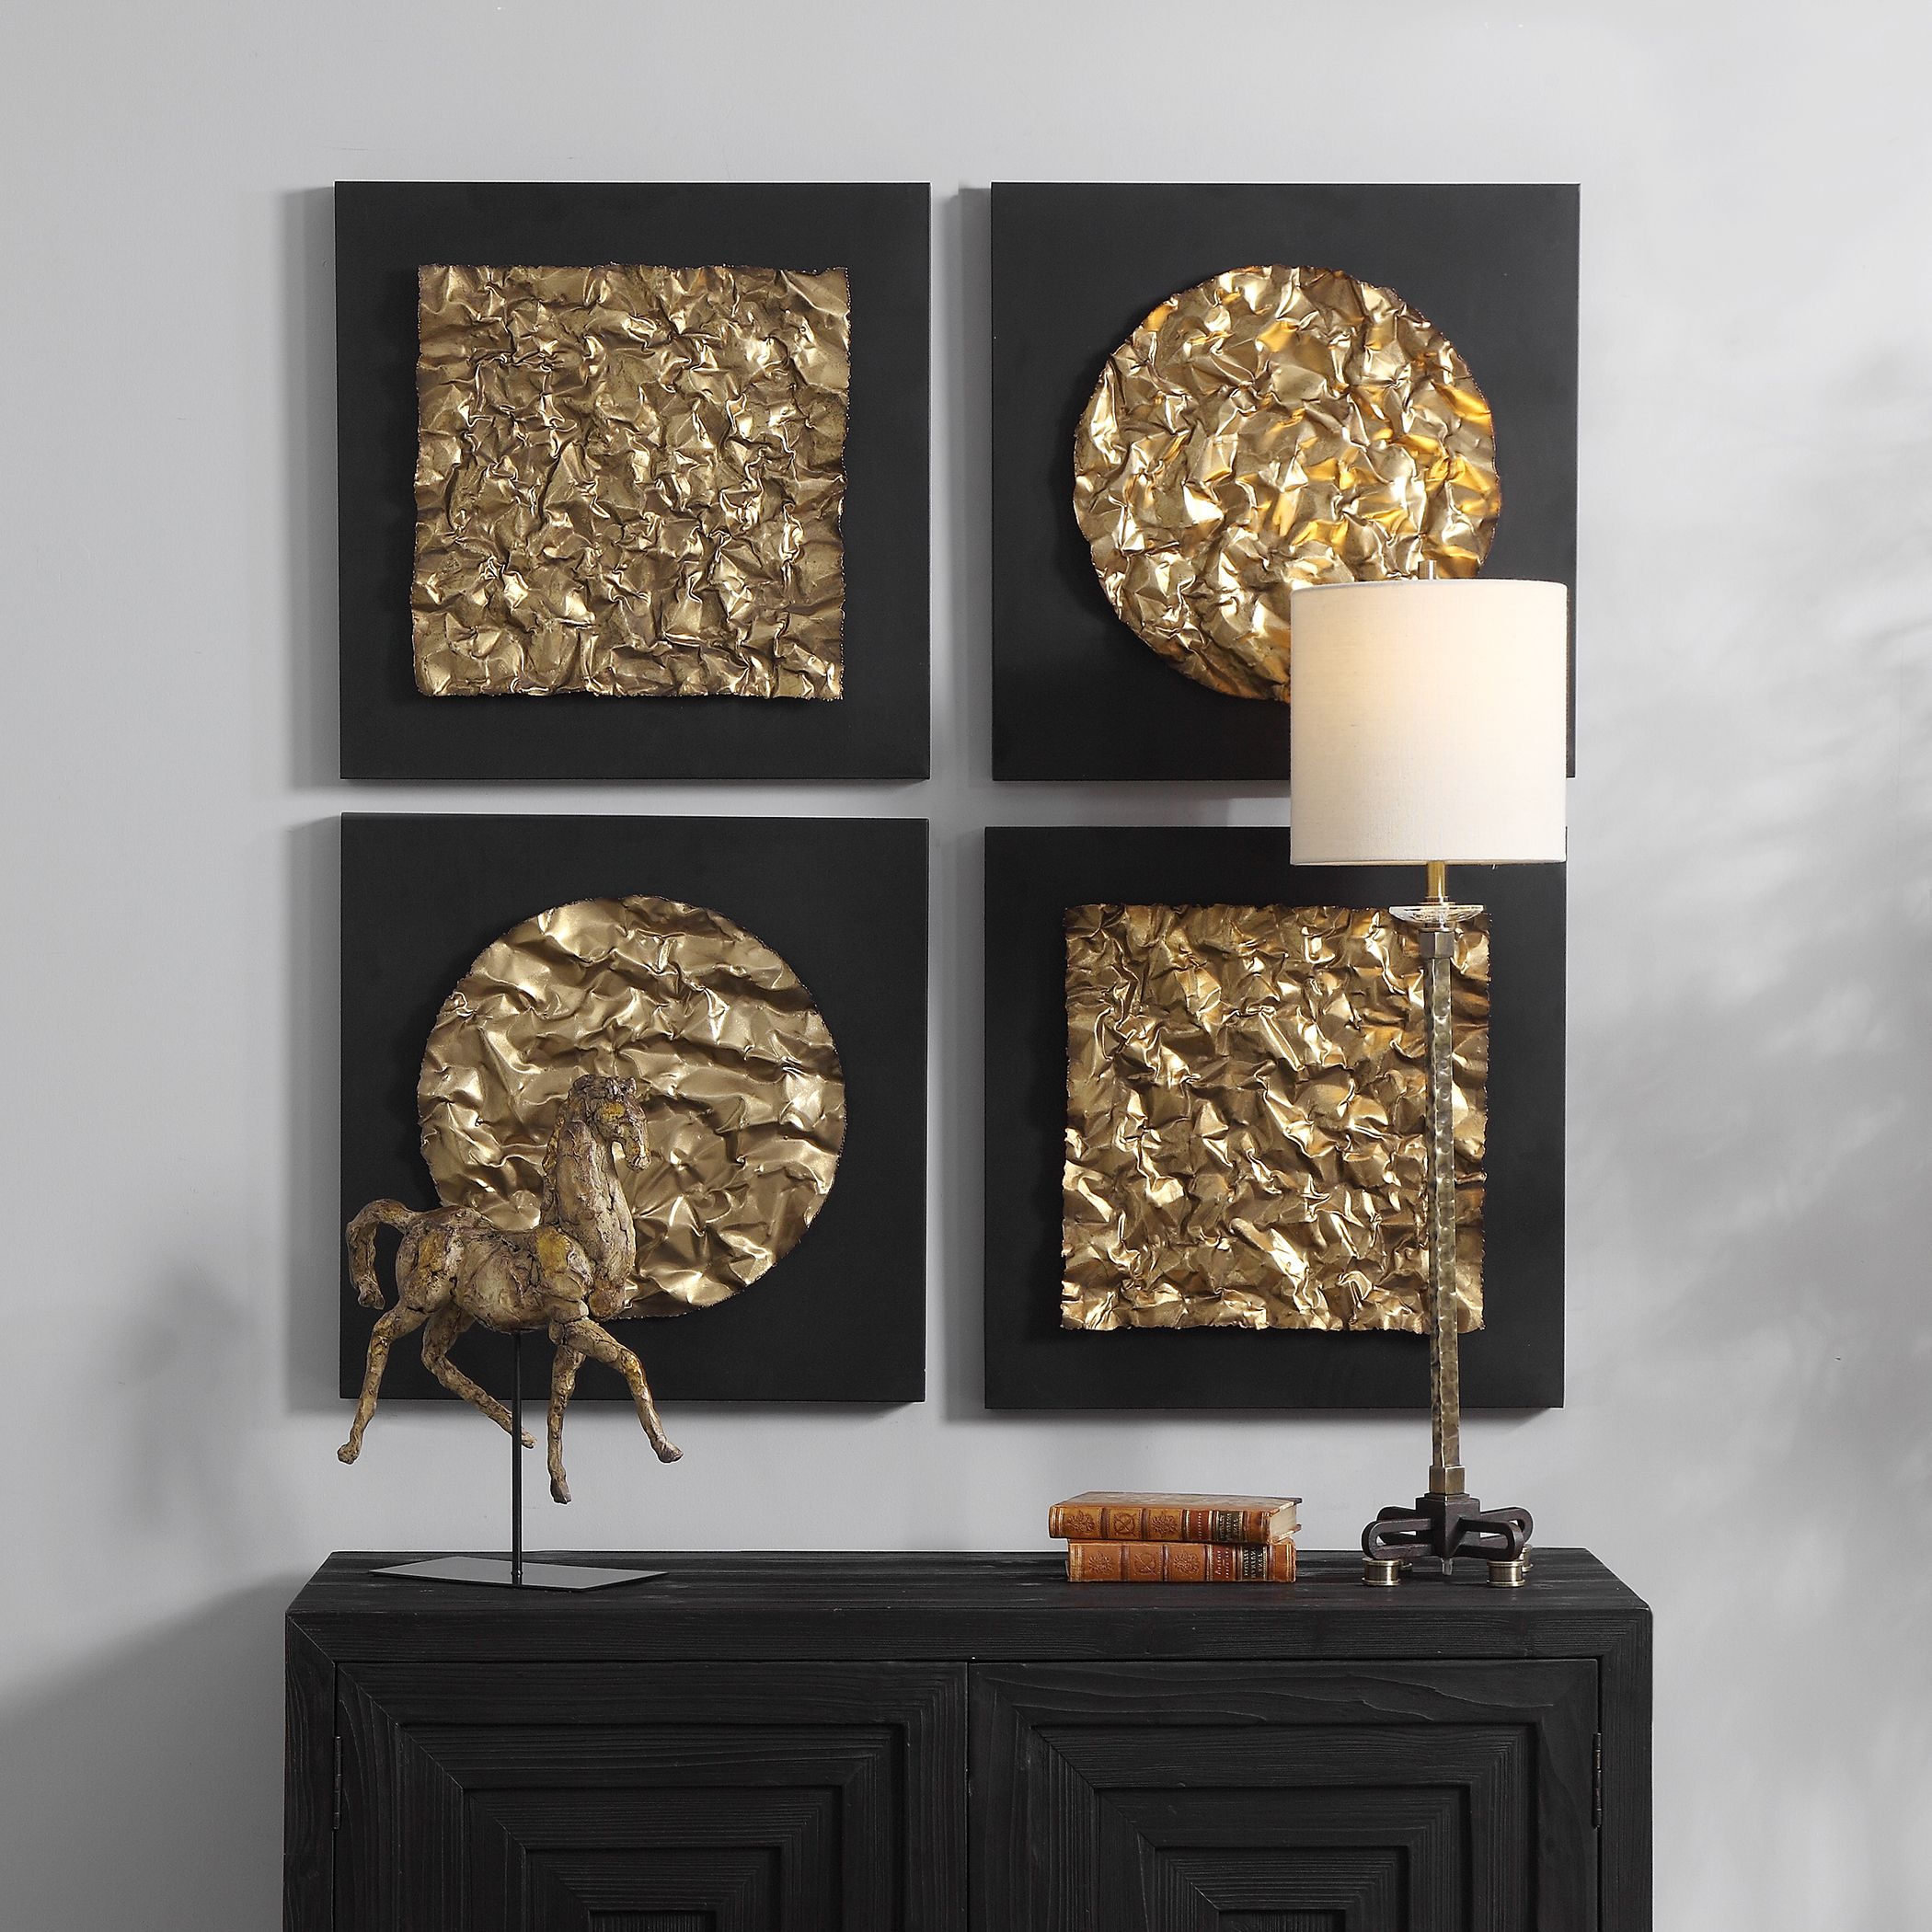 2018 Uttermost Boaz Gold Wall Decor, Set/2 Within Modern Metal Gold Wall Art (View 14 of 15)